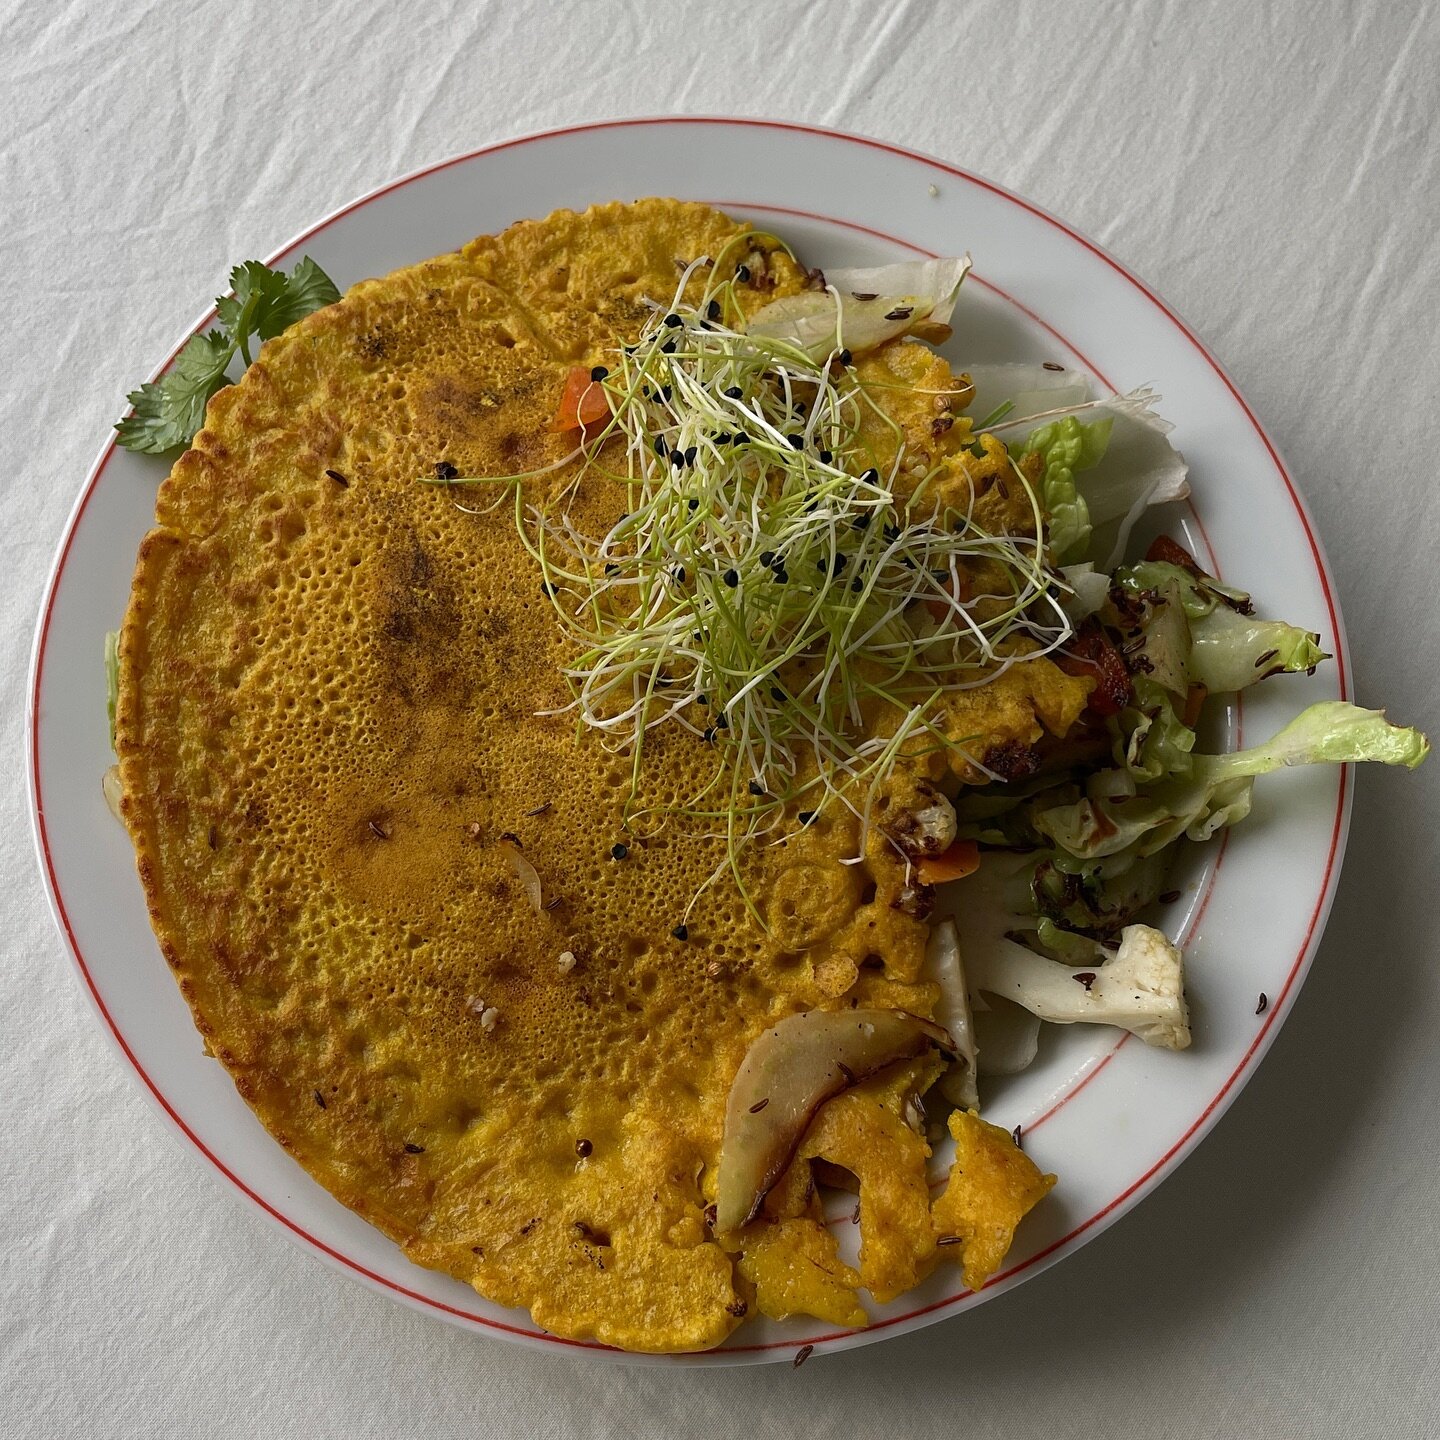 Divine chickpea pancakes

one of my favourite quick, easy, protein rich, healthy meals to make - and delicious too.

BLEND 
Chickpea flour + water (1:1)
Nutritional yeast (don&rsquo;t be shy)
Turmeric powder (1 teaspoon)
Salt
Pepper

Heat pan, add oi